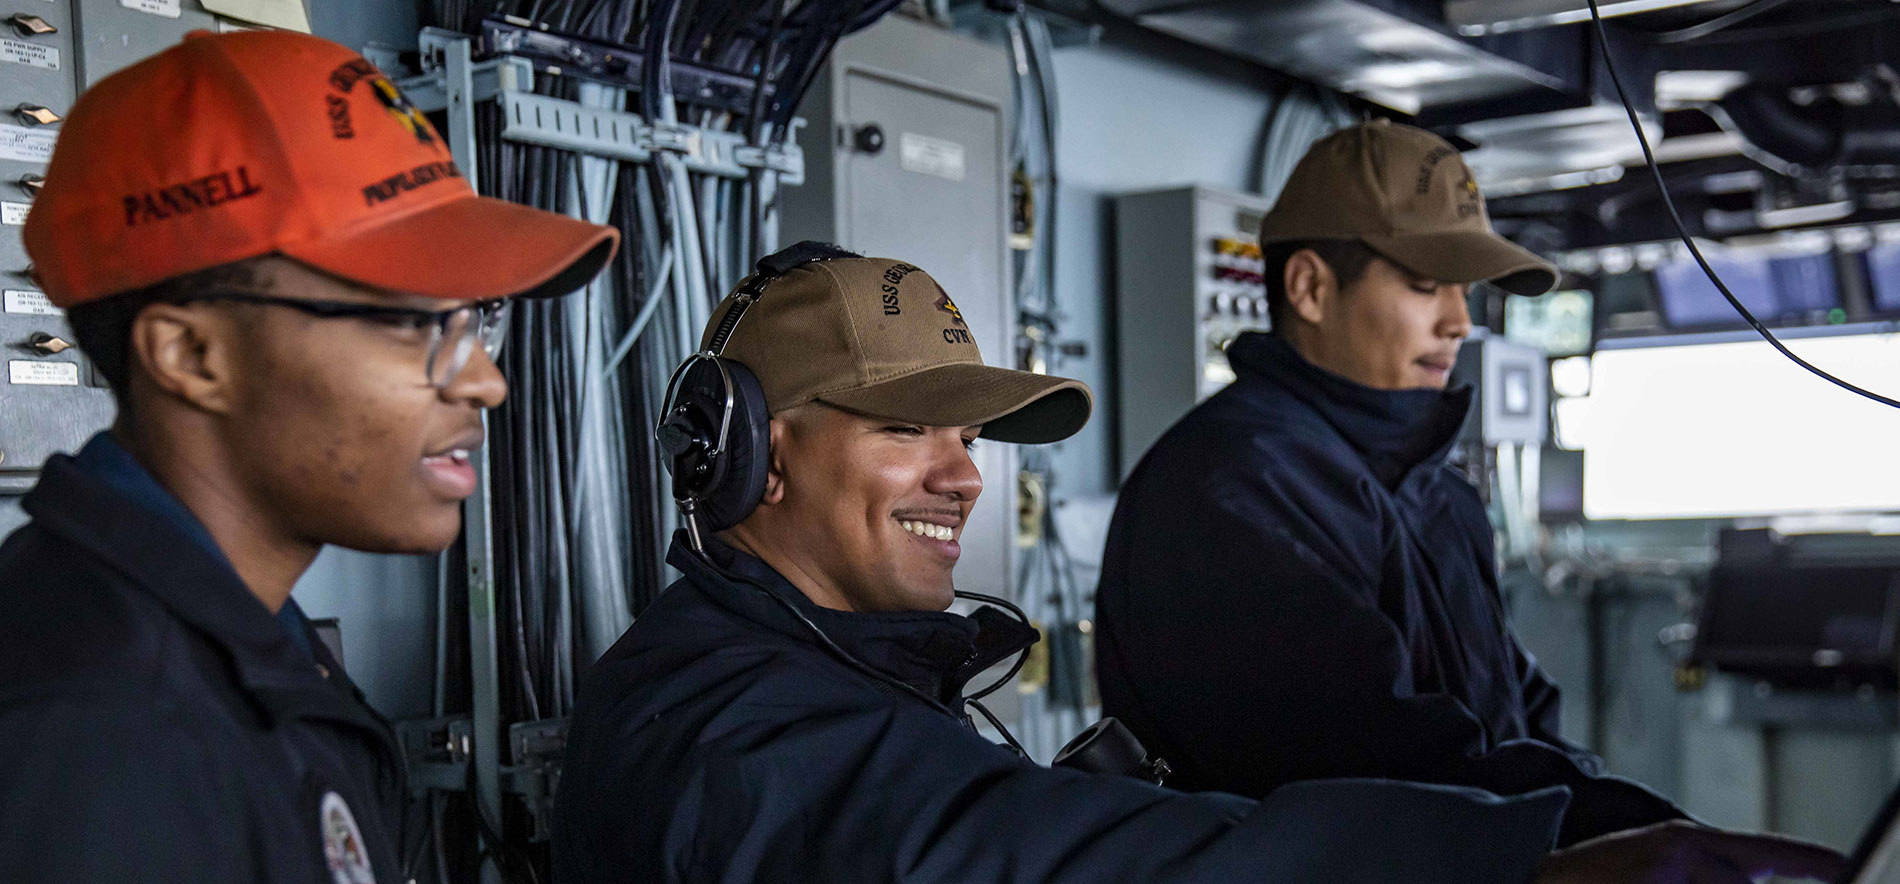 Three men from a different service division train together on a ship